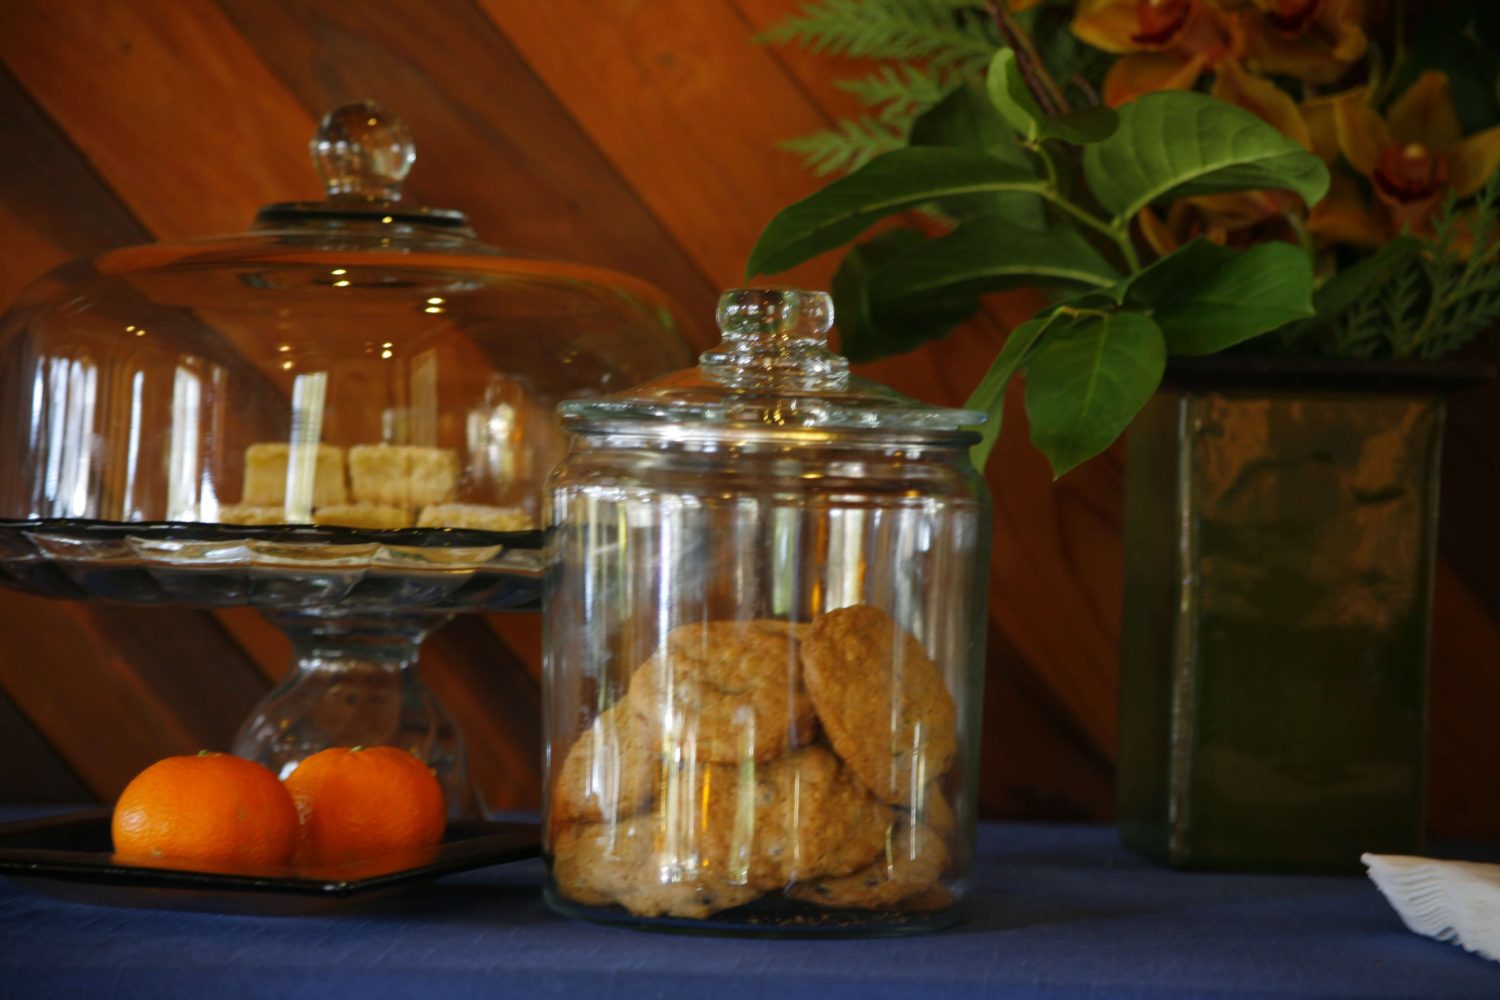 Cookie jar and tangerines on table